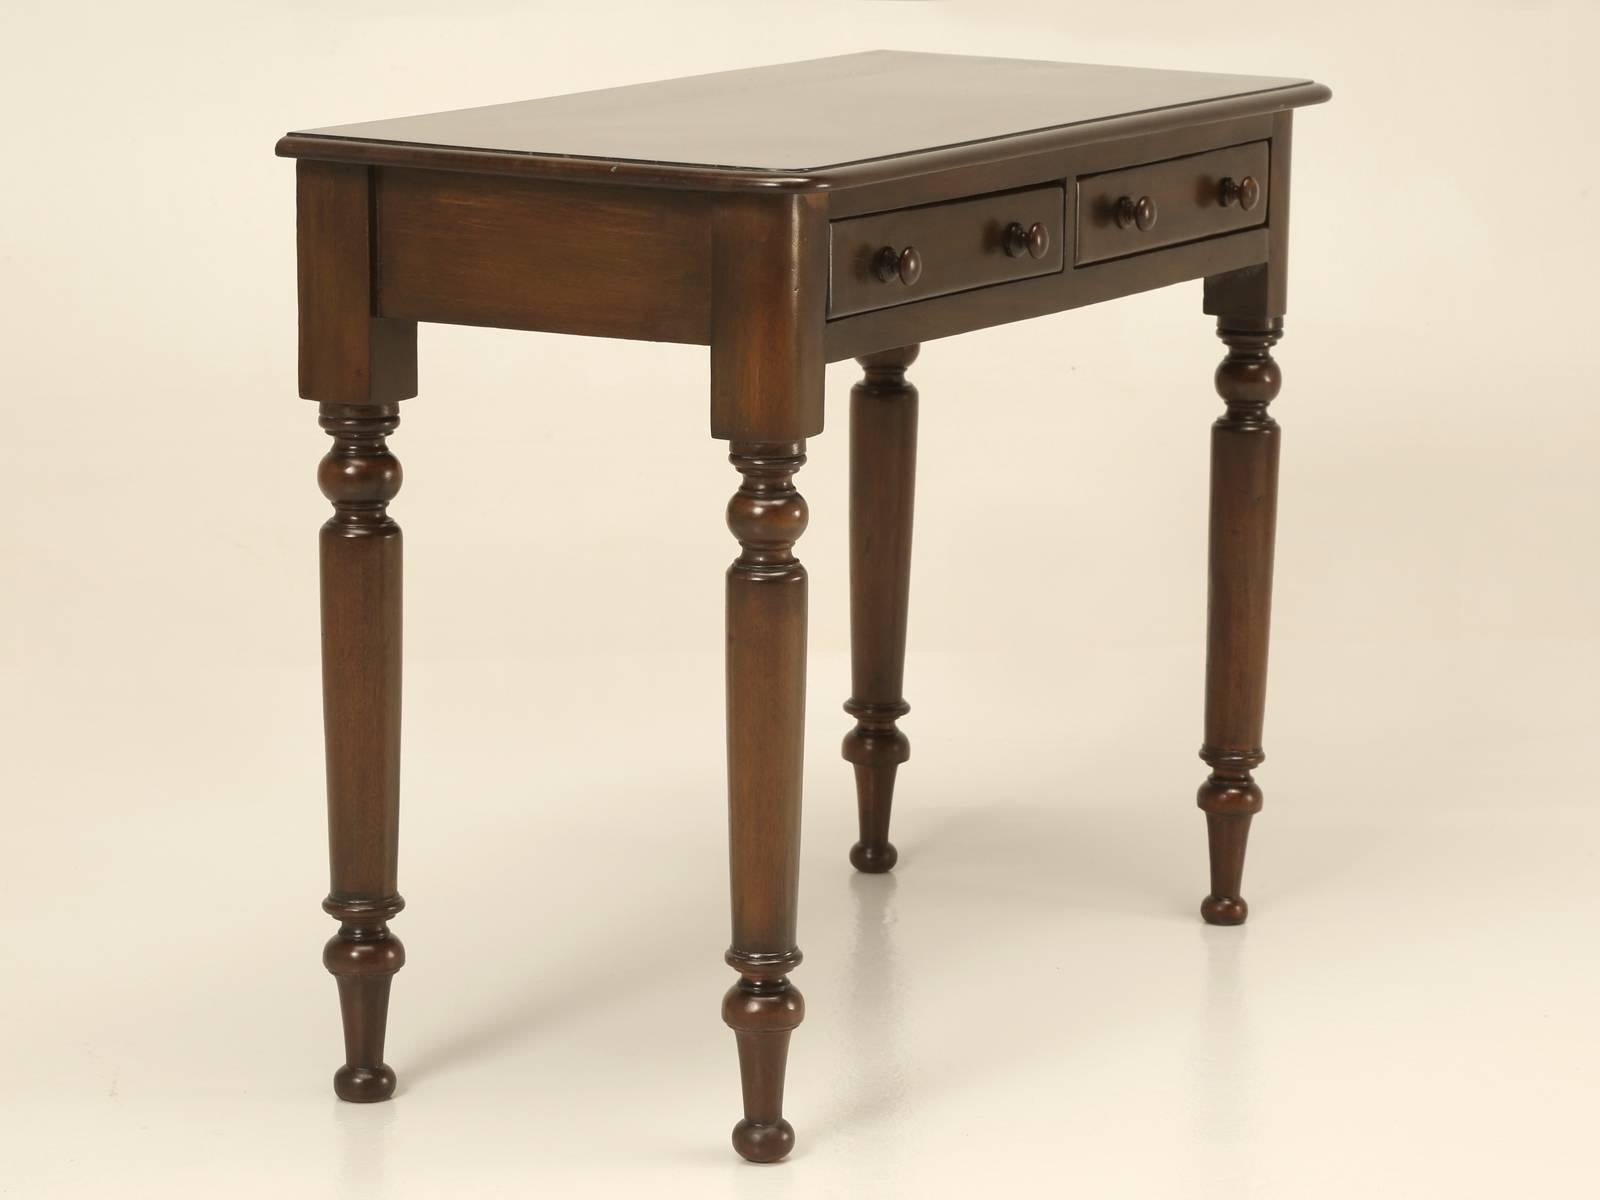 Petite console Table or ladies Writing Desk, made in France during the late 1800s from solid Mahogany. Beautifully restored, both structurally and cosmetically and ready for the next 100 years of service. Additionally, small Antique French Tables,